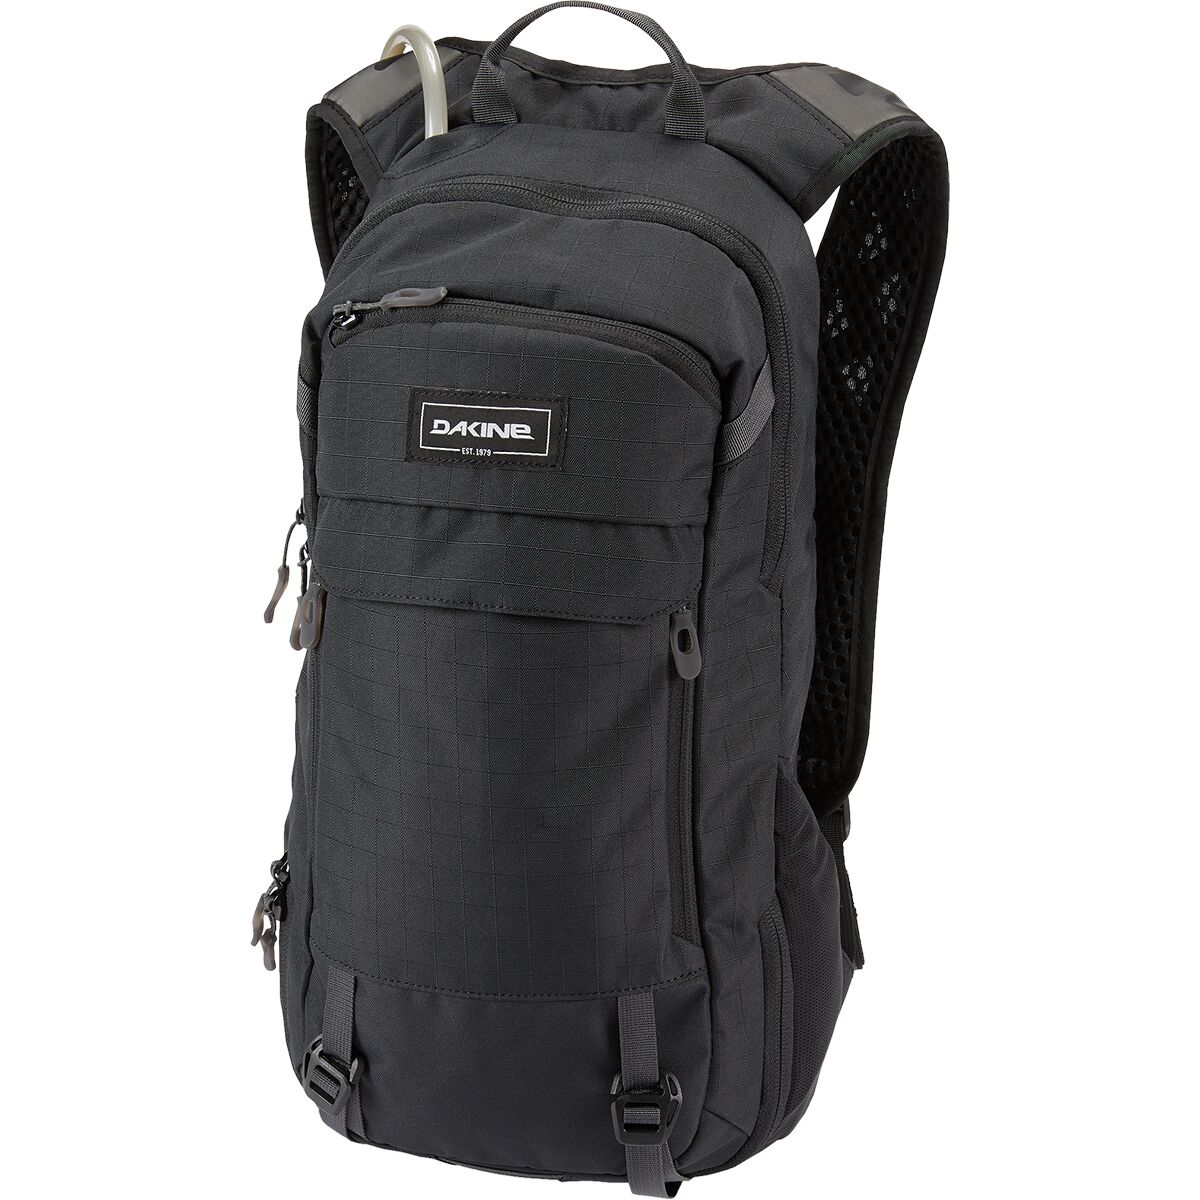 DAKINE Syncline 12L Hydration Pack Black, One Size